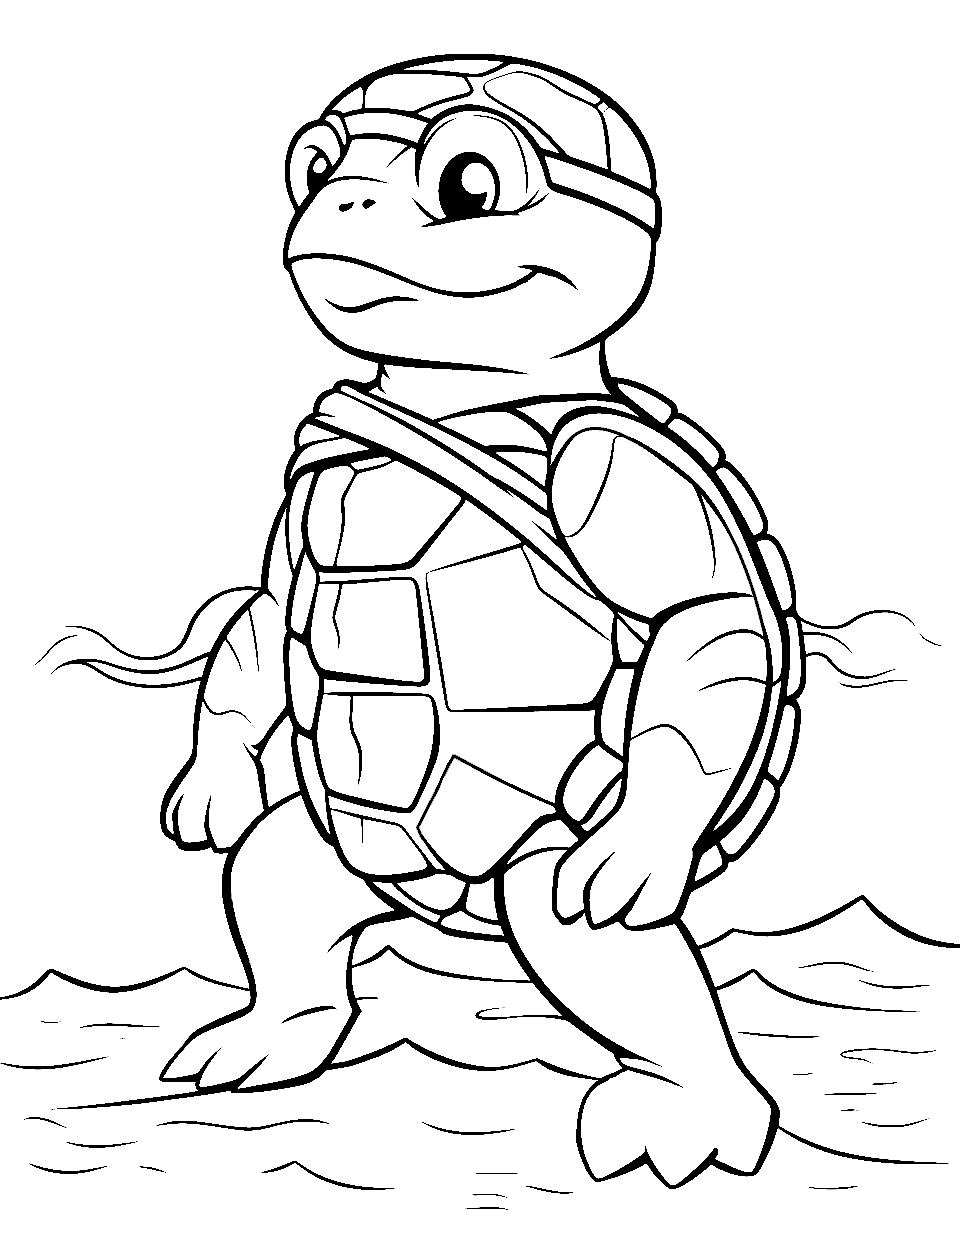 Michelangelo's Pose Turtle Coloring Page - A turtle striking a pose with a bandana, reminiscent of Michelangelo from the Ninja Turtles.